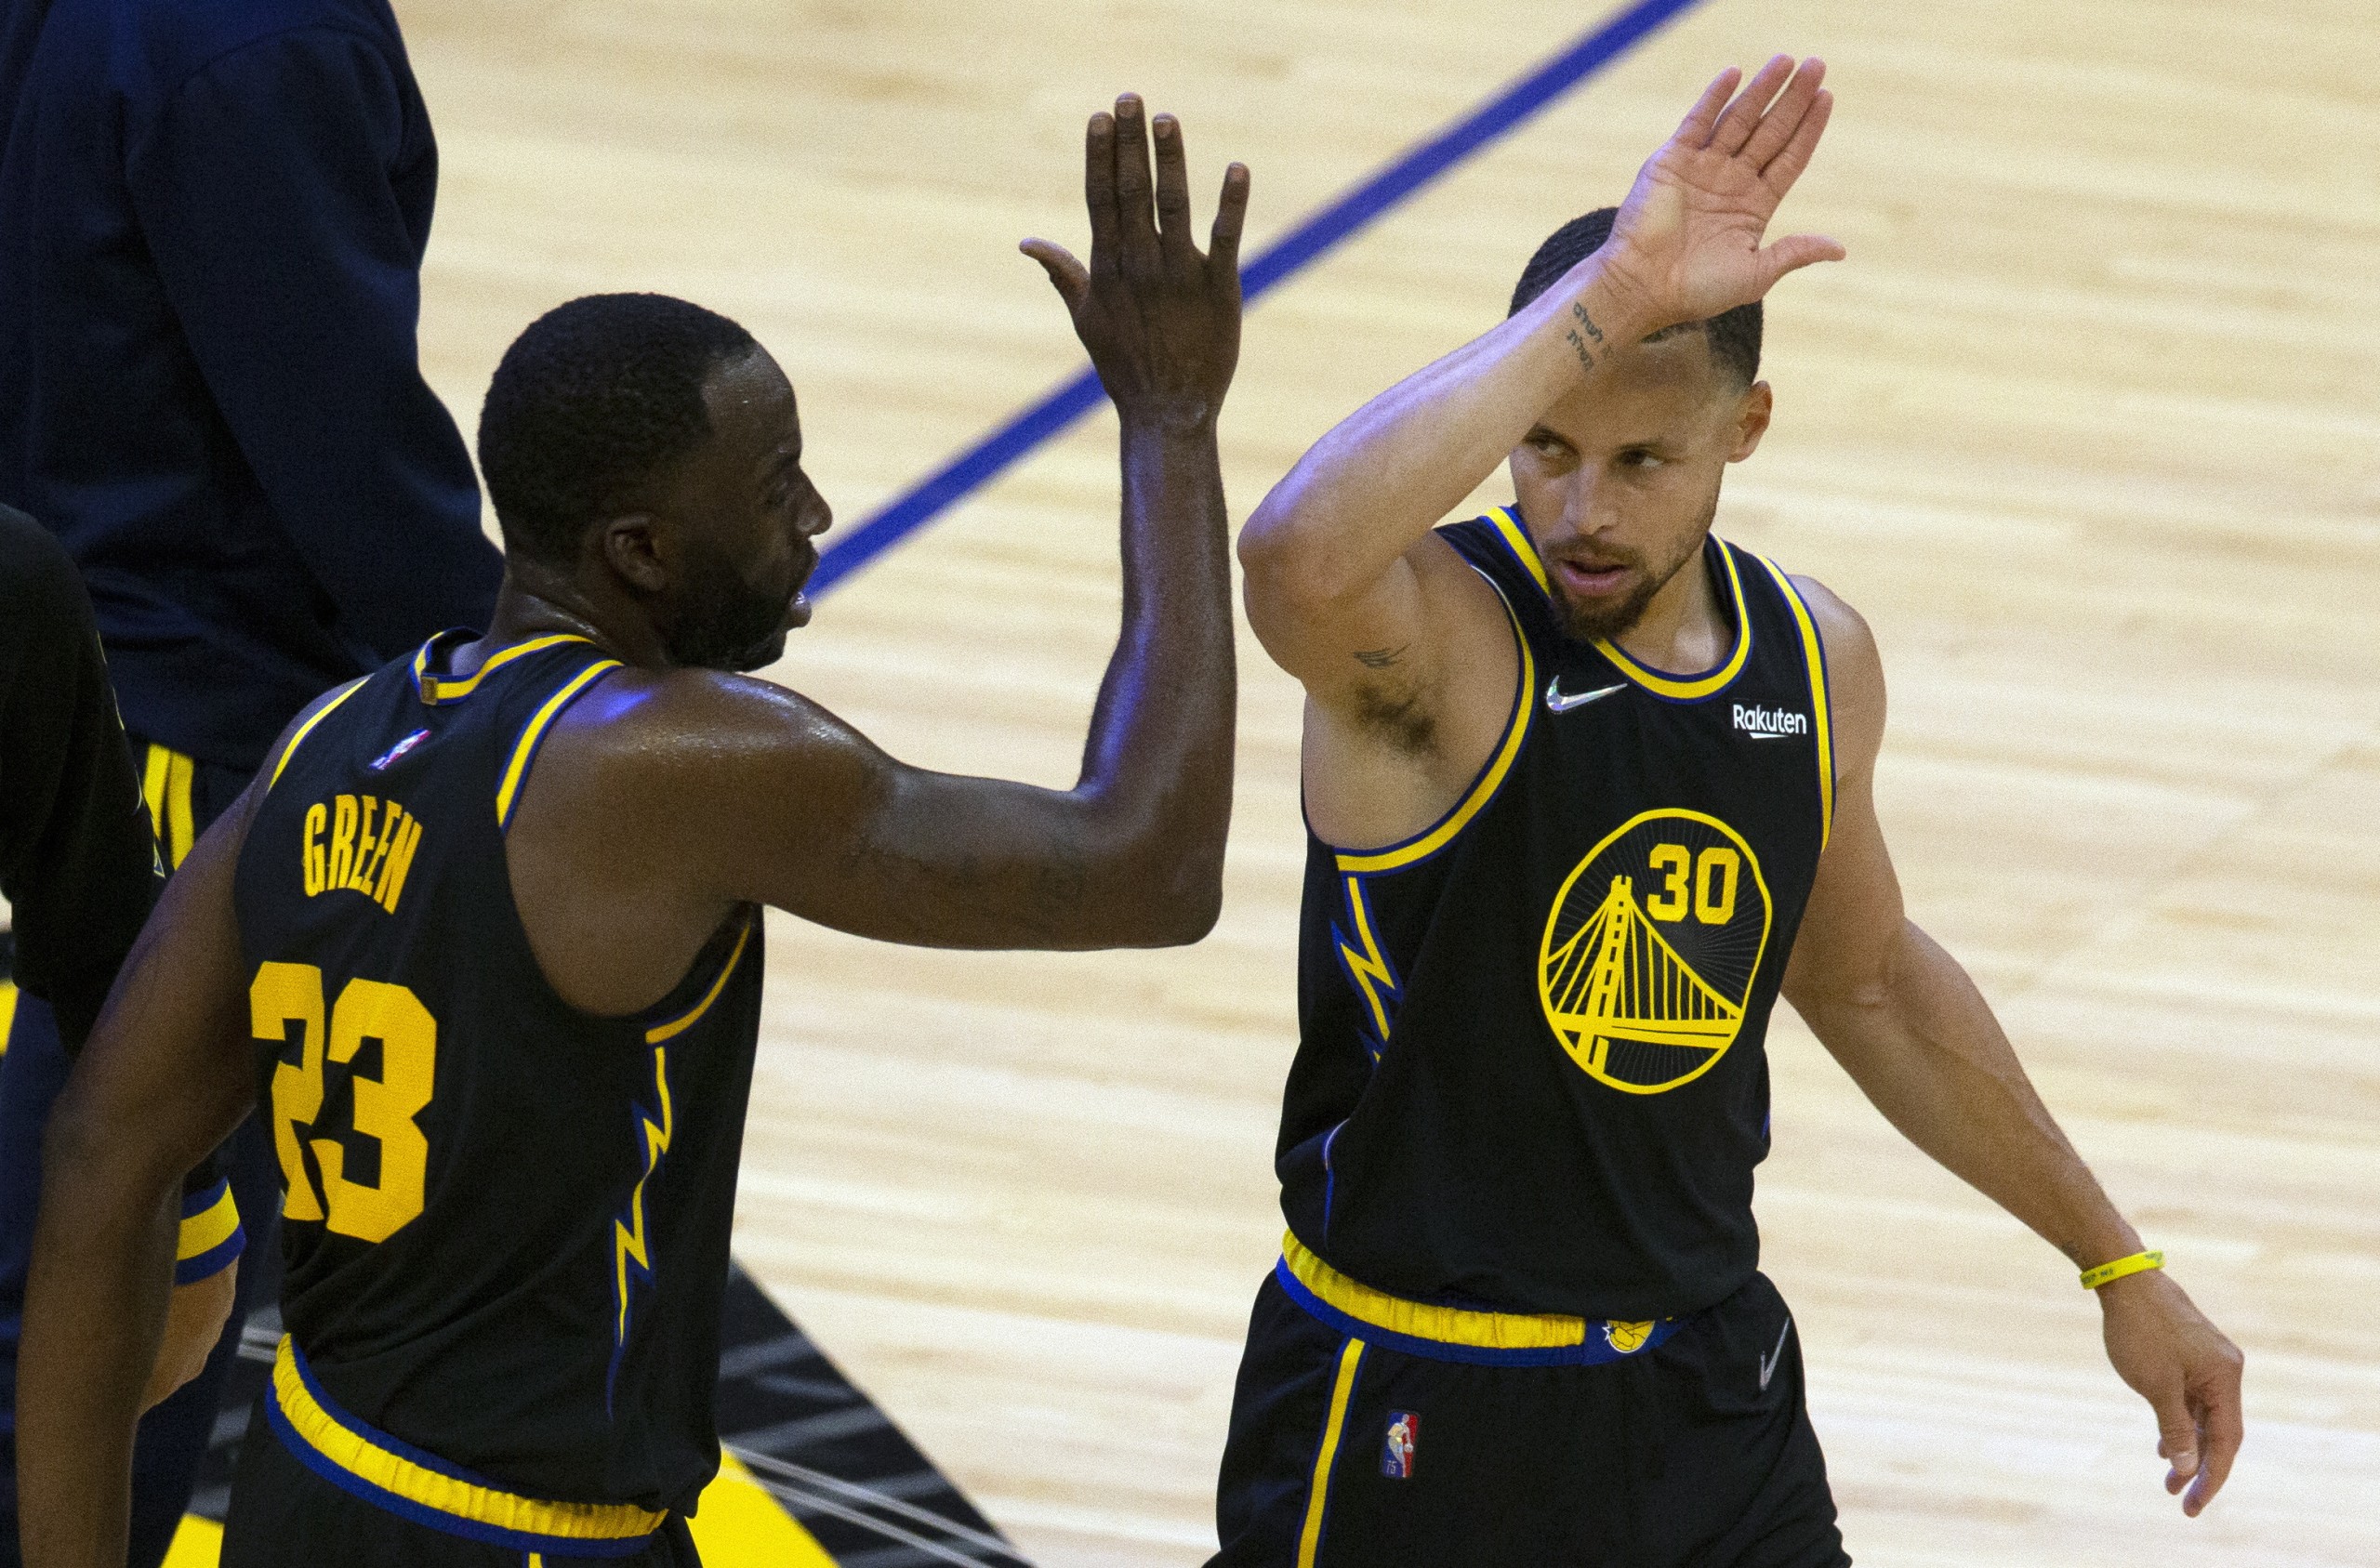 epa09894082 Golden State Warriors forward Draymond Green (L) high fives teammate Stephen Curry during the second quarter of the NBA basketball game between the Denver Nuggets and the Golden State Warriors at Chase Center in San Francisco, California, USA, 16 April 2022.  EPA/D. ROSS CAMERON  SHUTTERSTOCK OUT